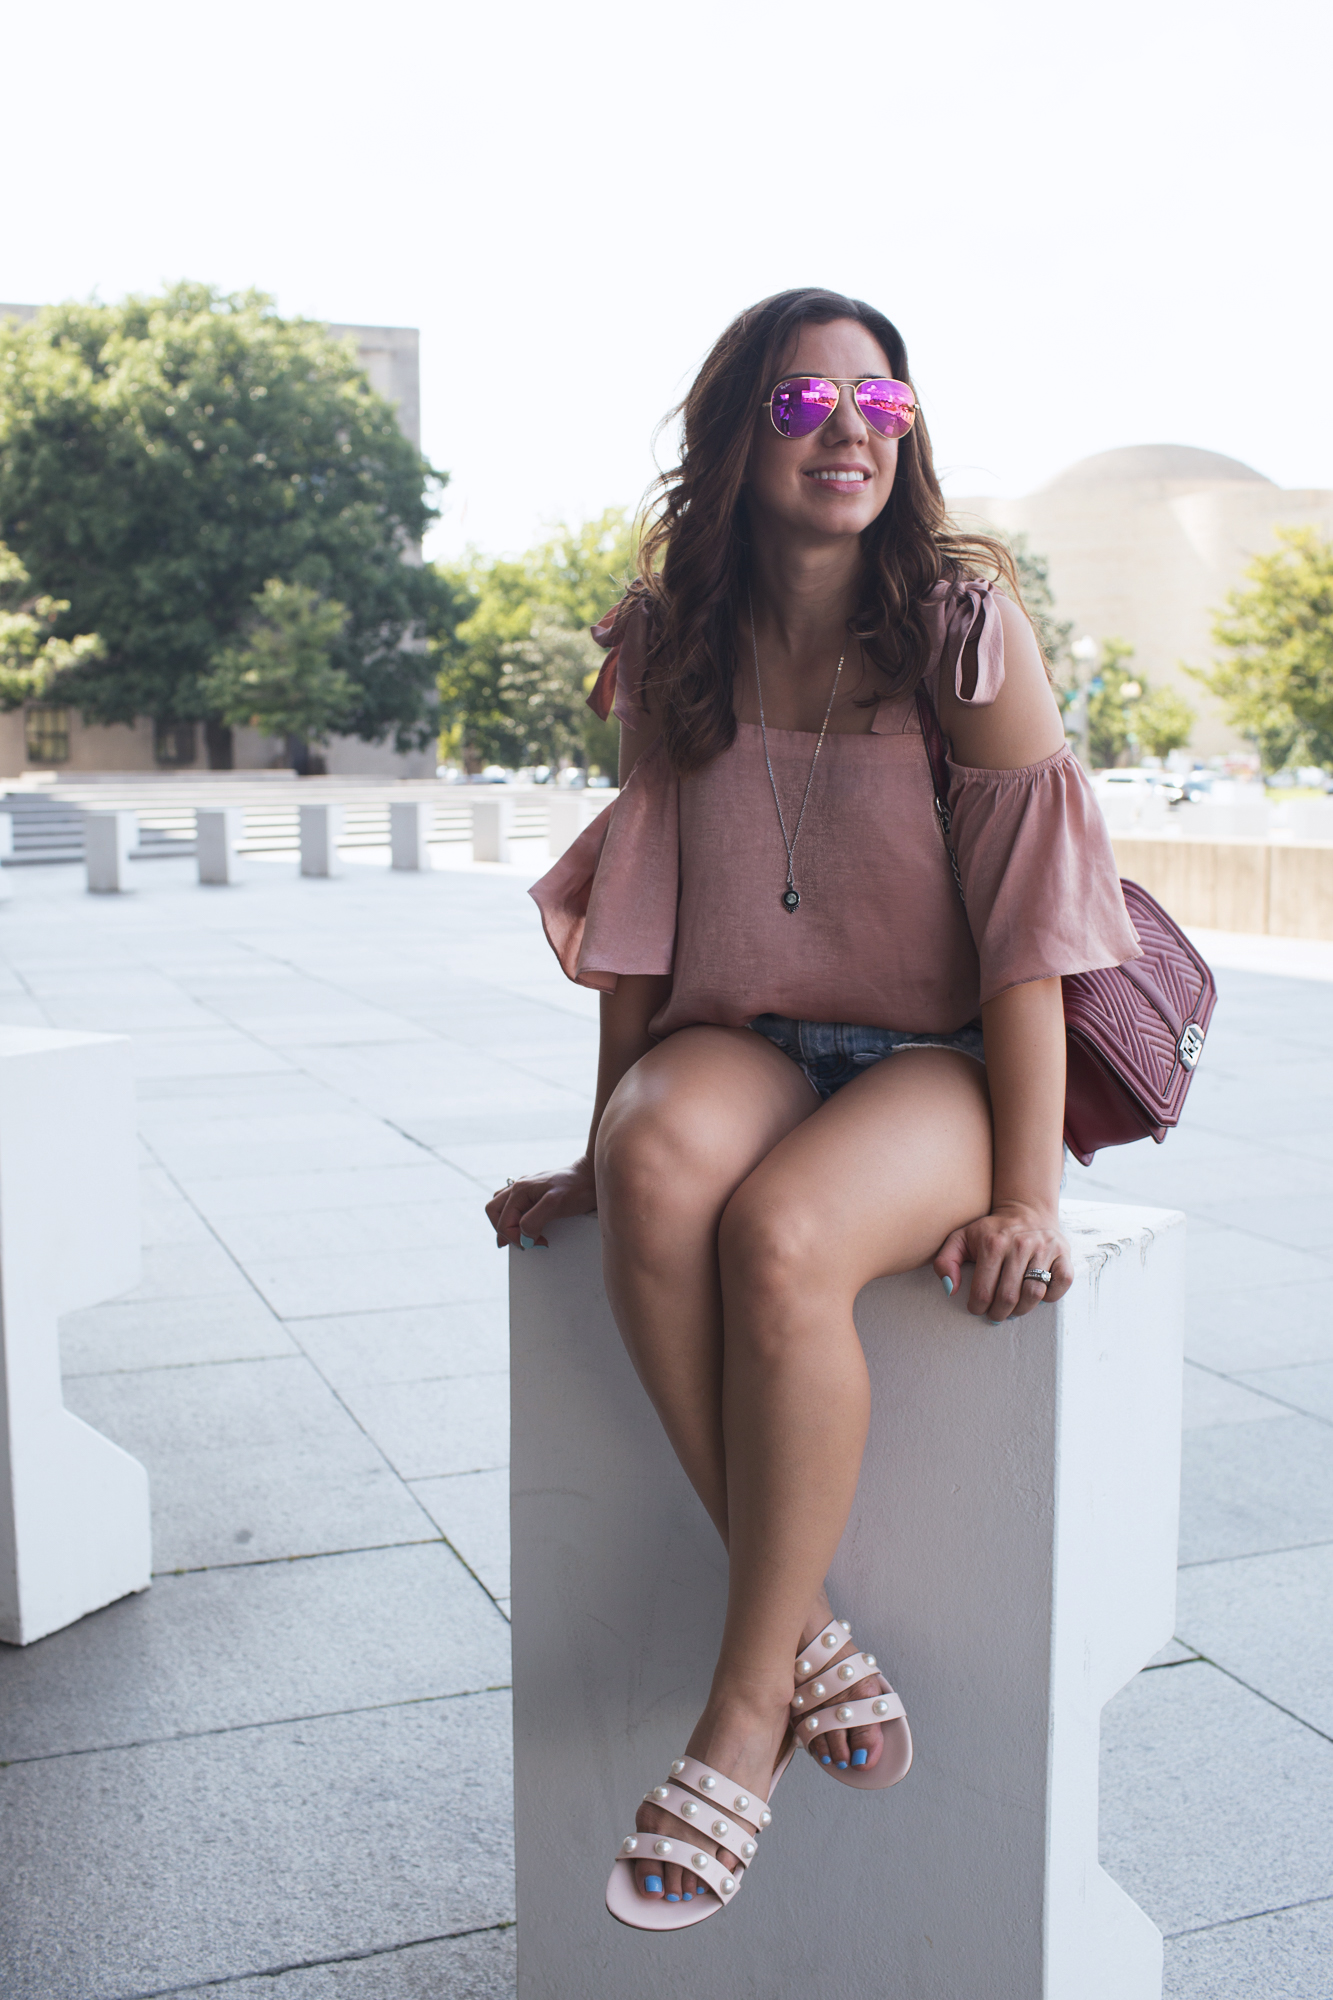 Lifestyle blogger Roxanne of Glass of Glam wearing Moonglow jewelry and Rayban sunglasses